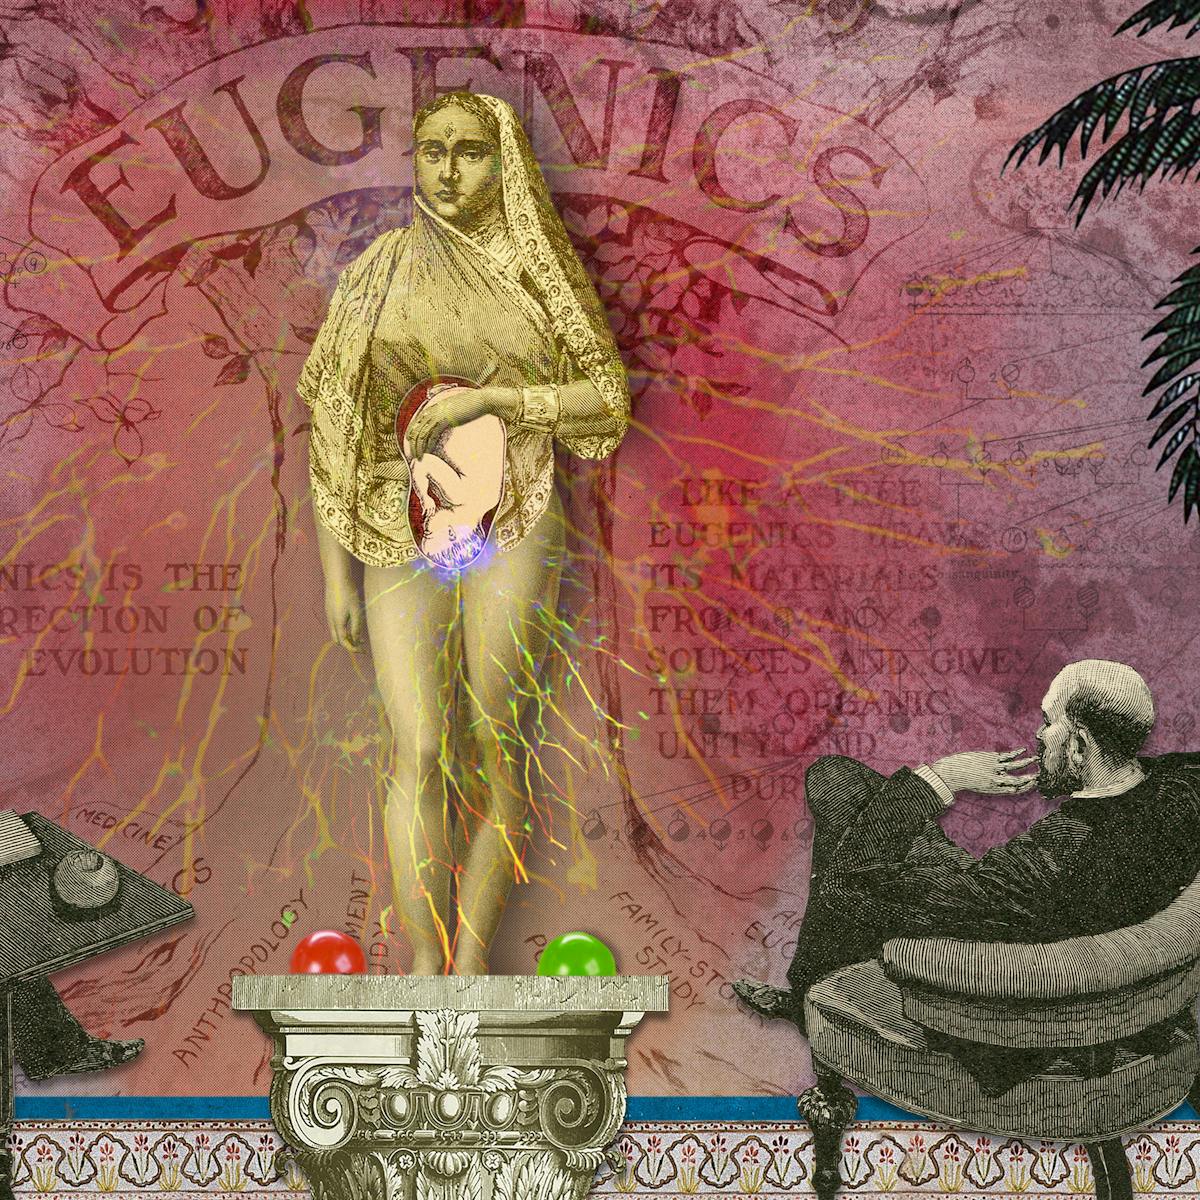 Illustration using collage techniques. Image shows a scene made up of mainly red and blue hues. In the centre of the image stands a woman on an ornate pedestal, naked from the waist down. Her left hand rest on the top of a superimposed illustration of a baby in the womb. Either side of her feet is a green domed light to the right and a red one to the left. Seated either side of her are two Victorian clan men reclining in comfortable chairs staring at her, one holding a cigar.  In the background can be seen the word 'Eugenics' and floral and palm leaf motifs.